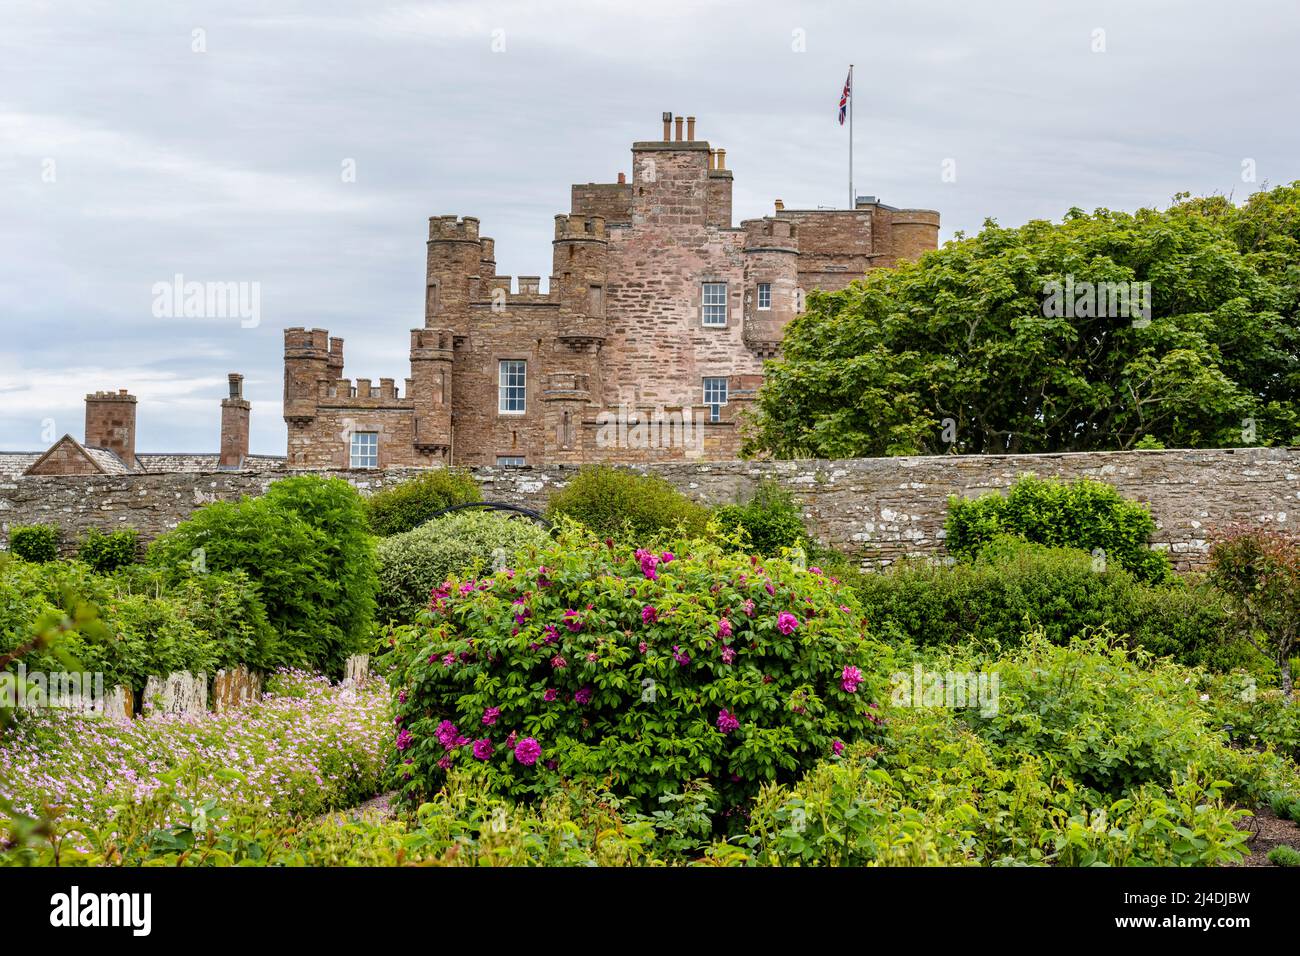 View of the Castle of Mey from the walled garden in Caithness on the north coast of Scotland, UK Stock Photo